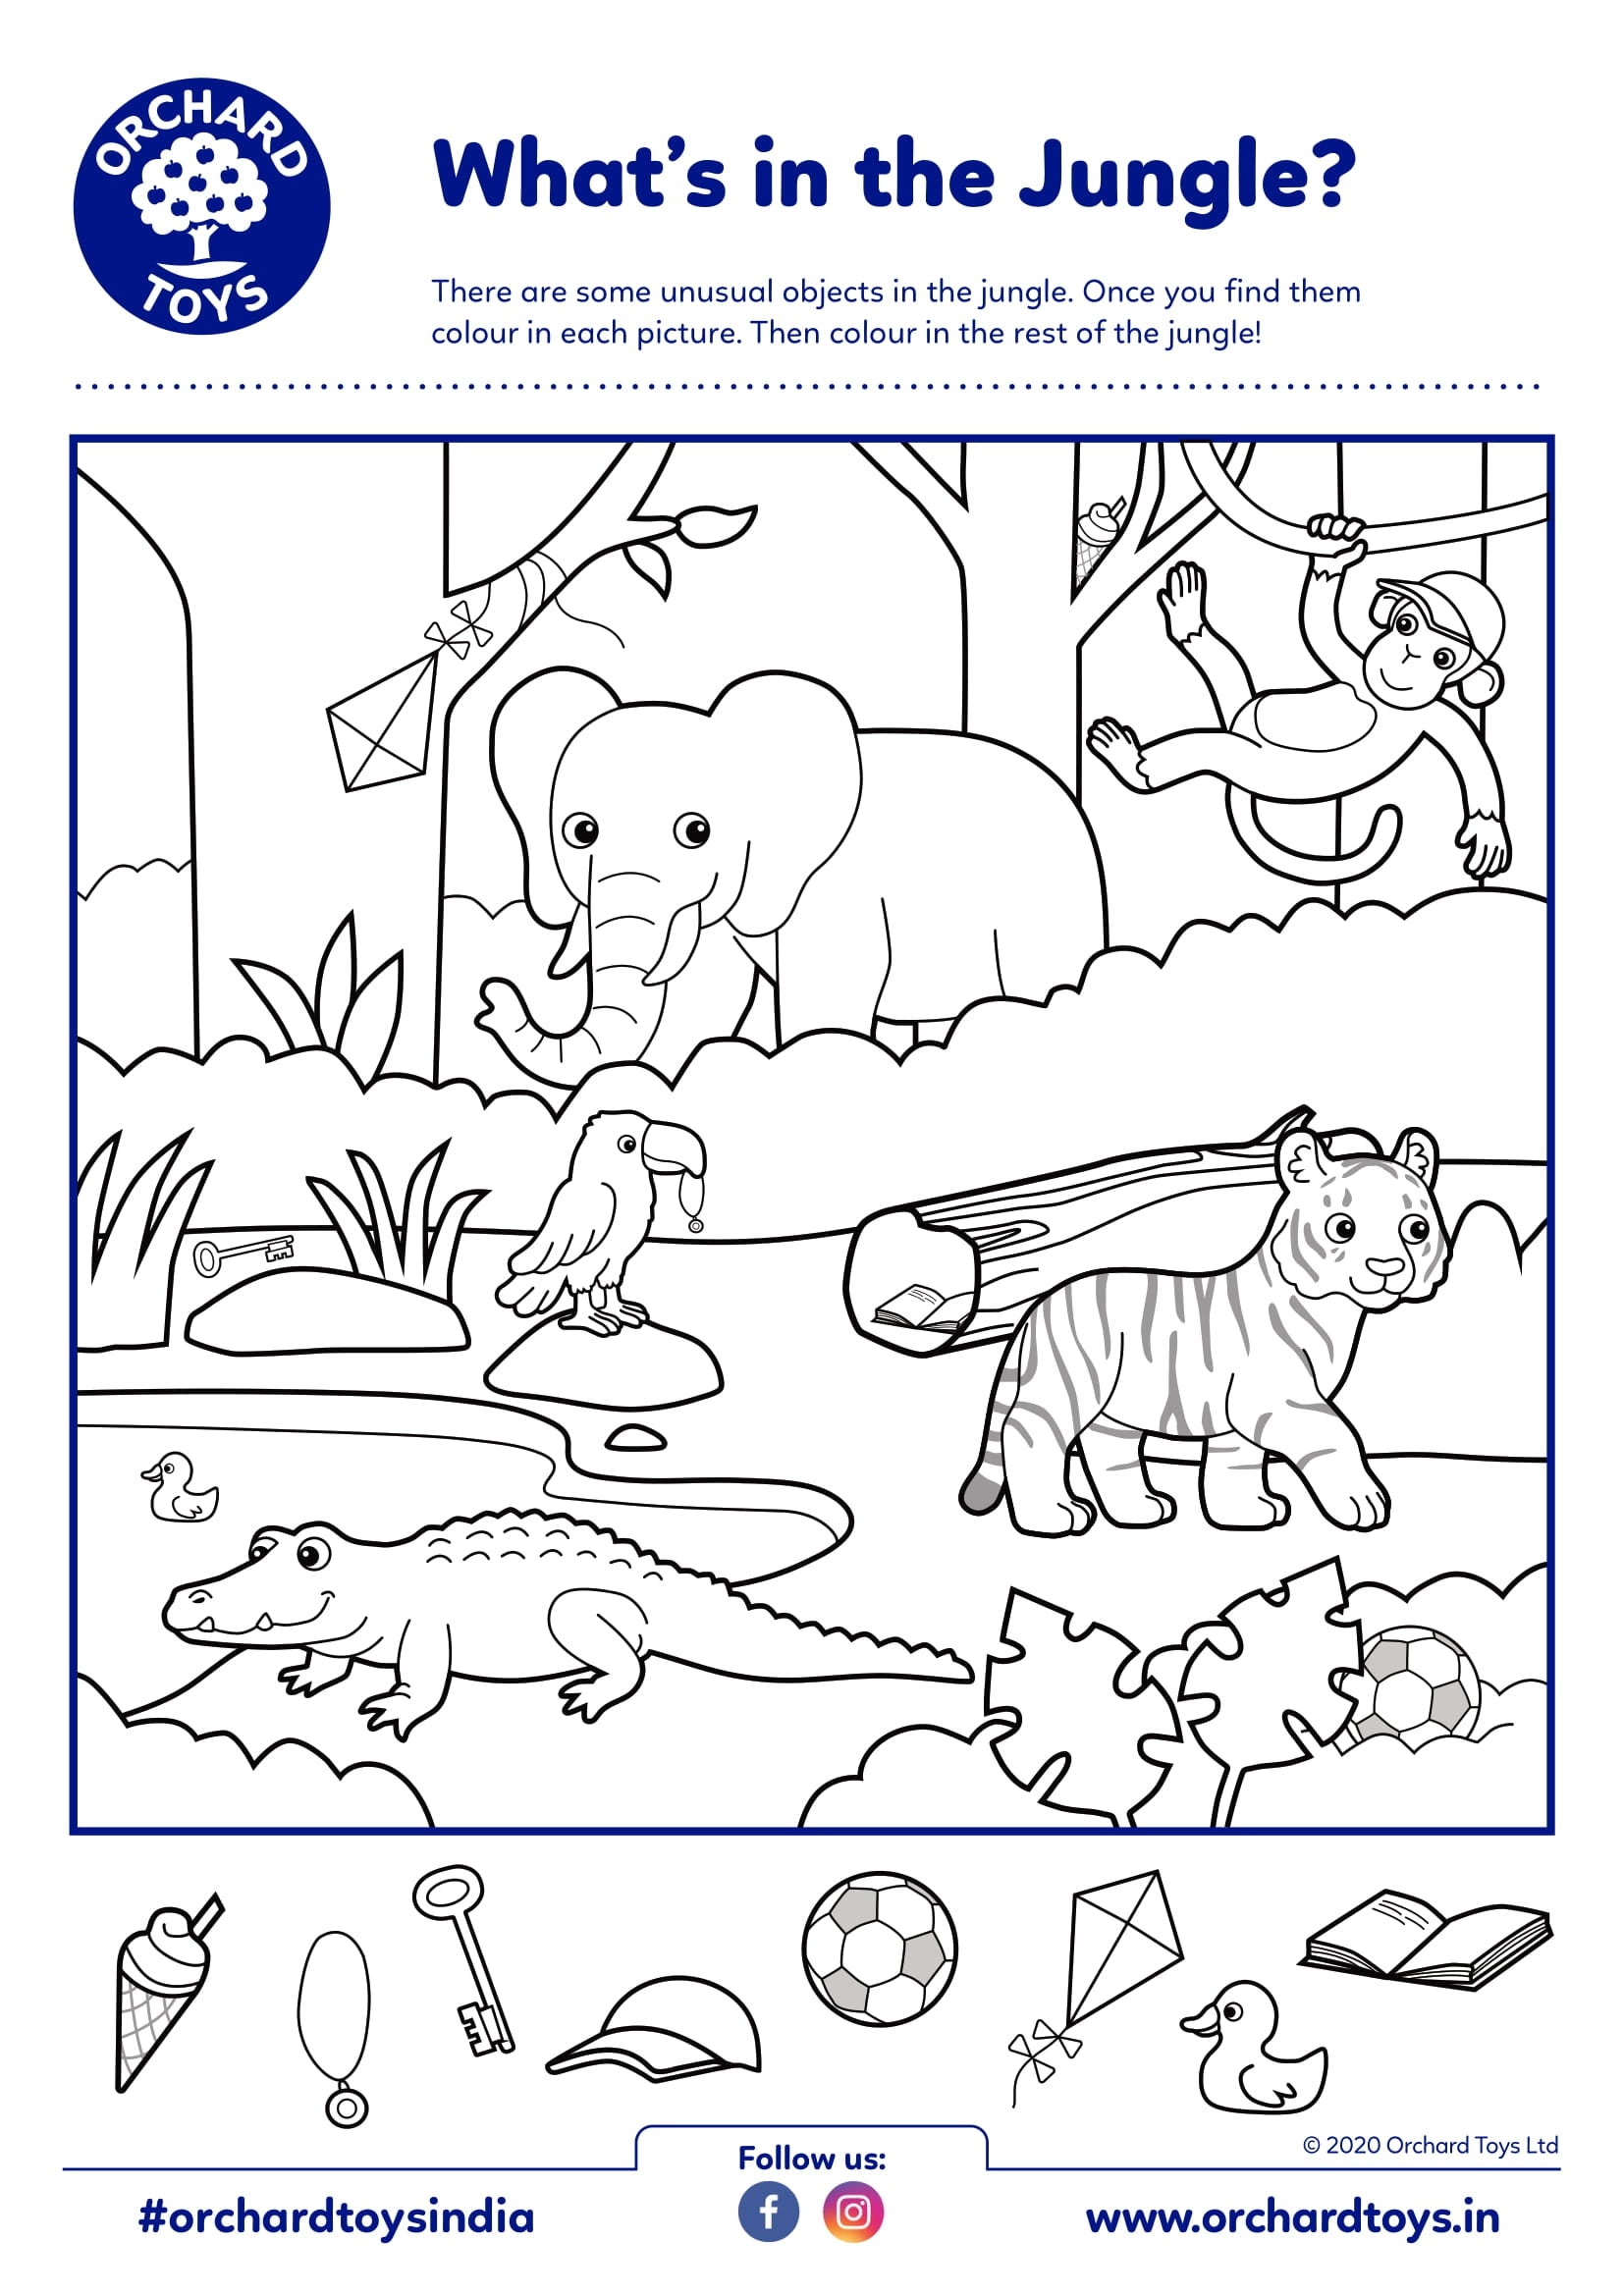 What's in the Jungle Activity Sheet